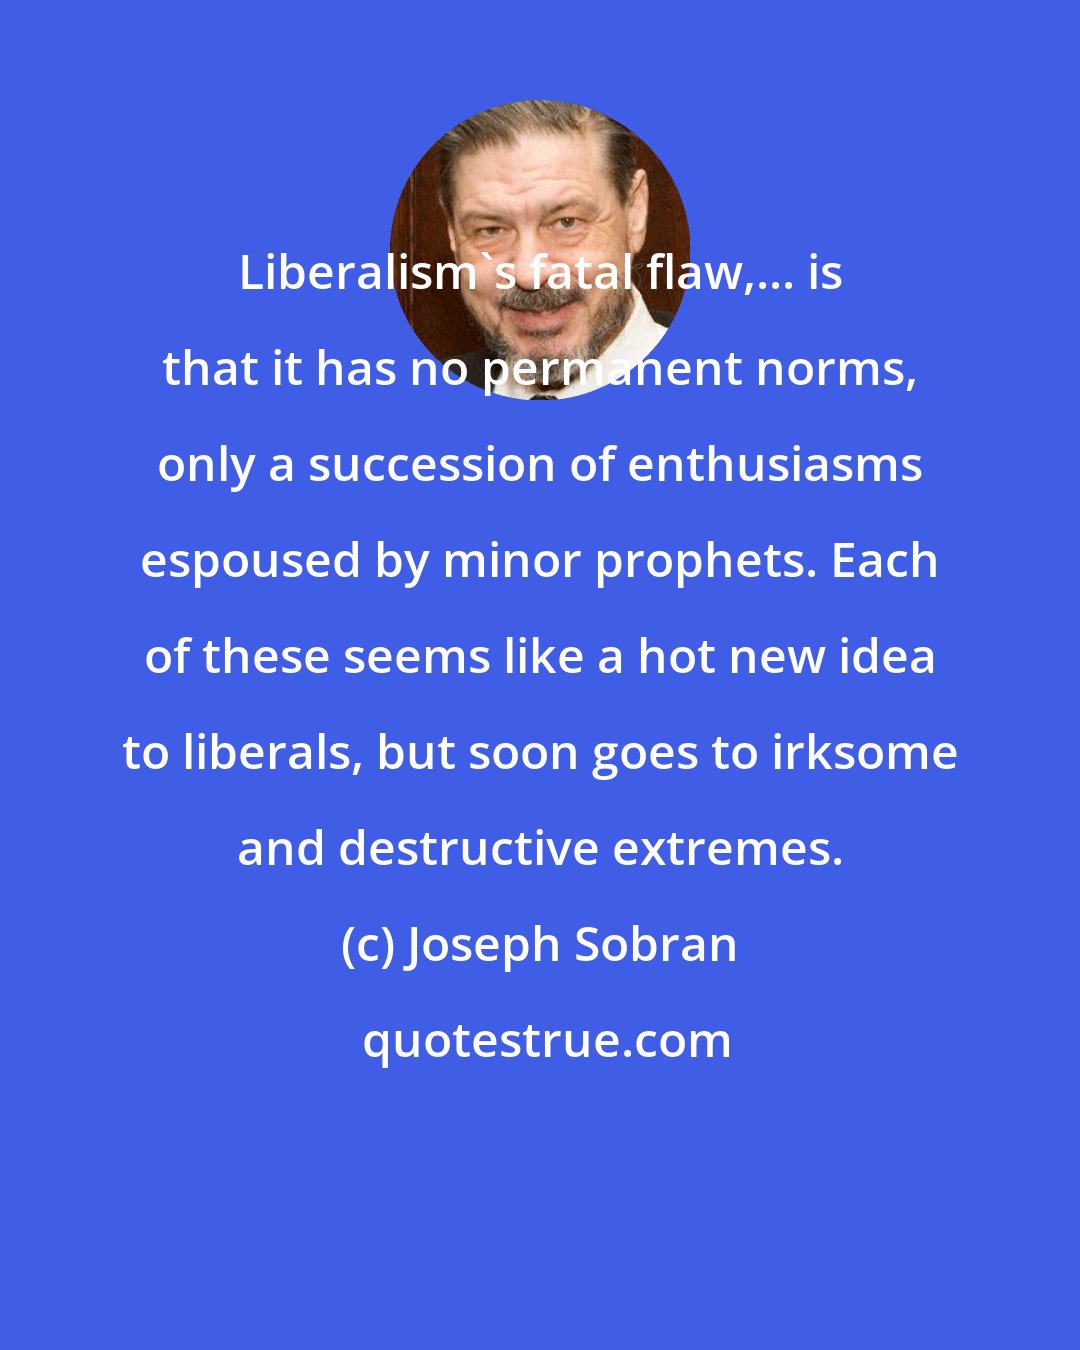 Joseph Sobran: Liberalism's fatal flaw,... is that it has no permanent norms, only a succession of enthusiasms espoused by minor prophets. Each of these seems like a hot new idea to liberals, but soon goes to irksome and destructive extremes.